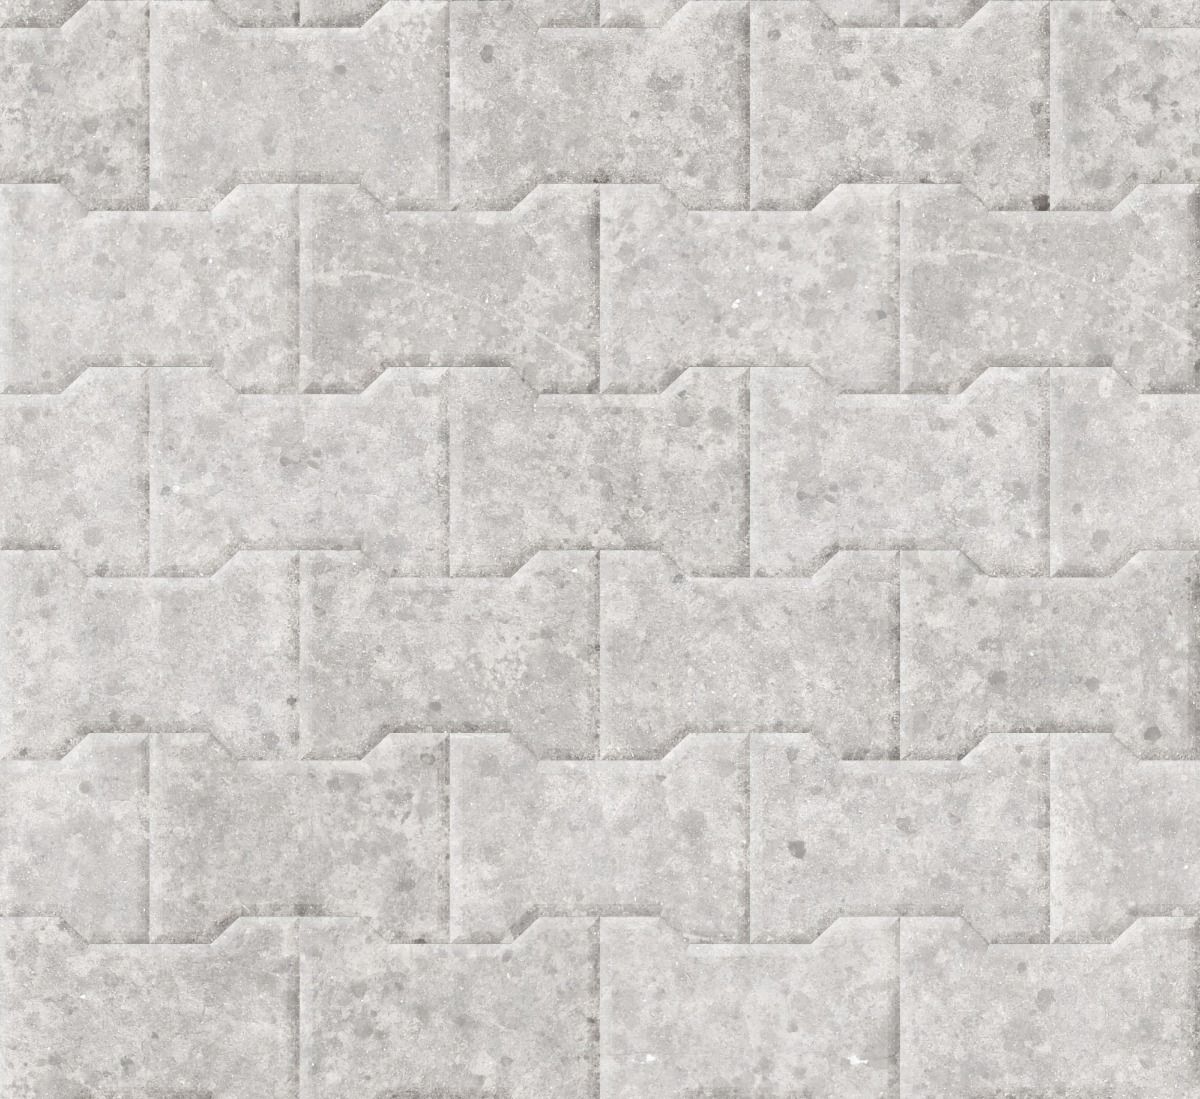 A seamless concrete texture with concrete blocks arranged in a Bowtie Pavers pattern